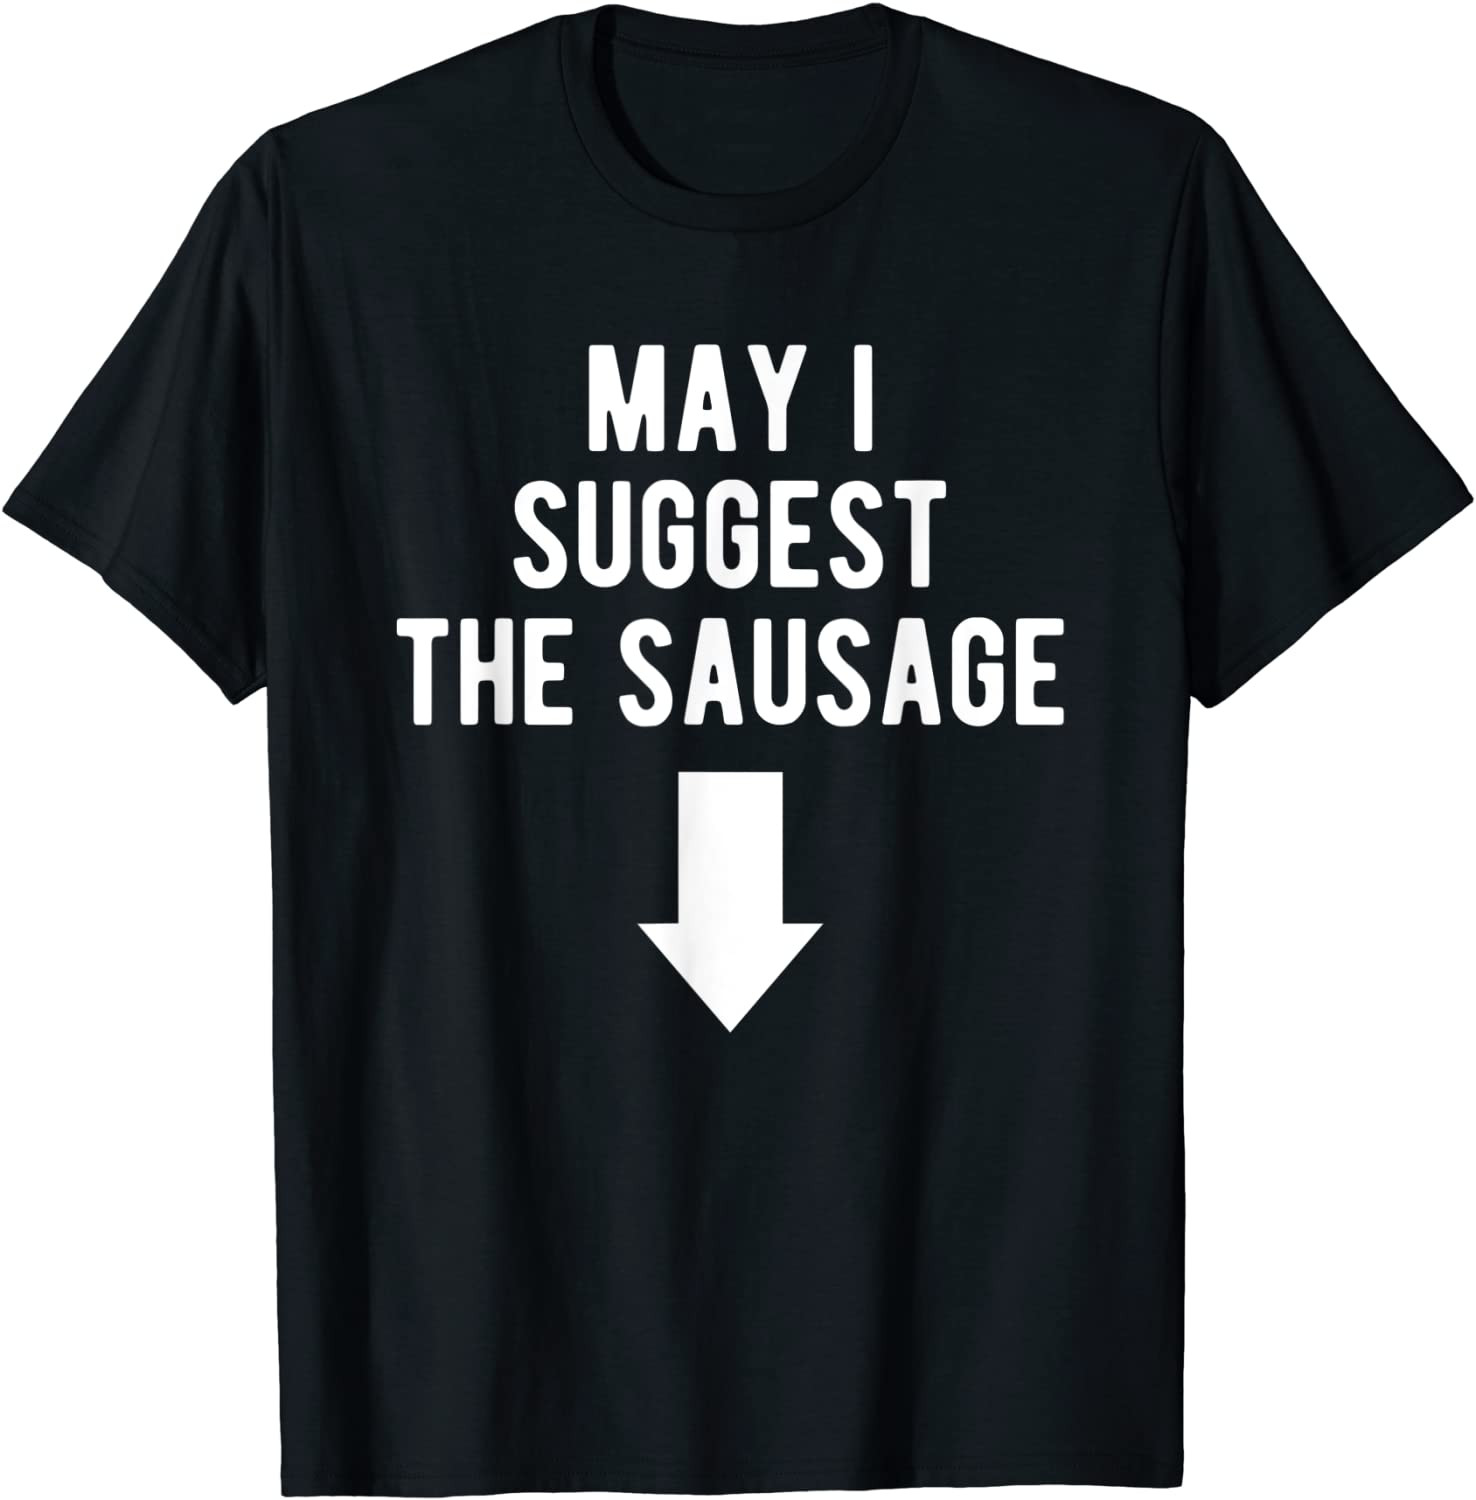 Funny May I Suggest The Sausage Offensive Garment T-Shirt